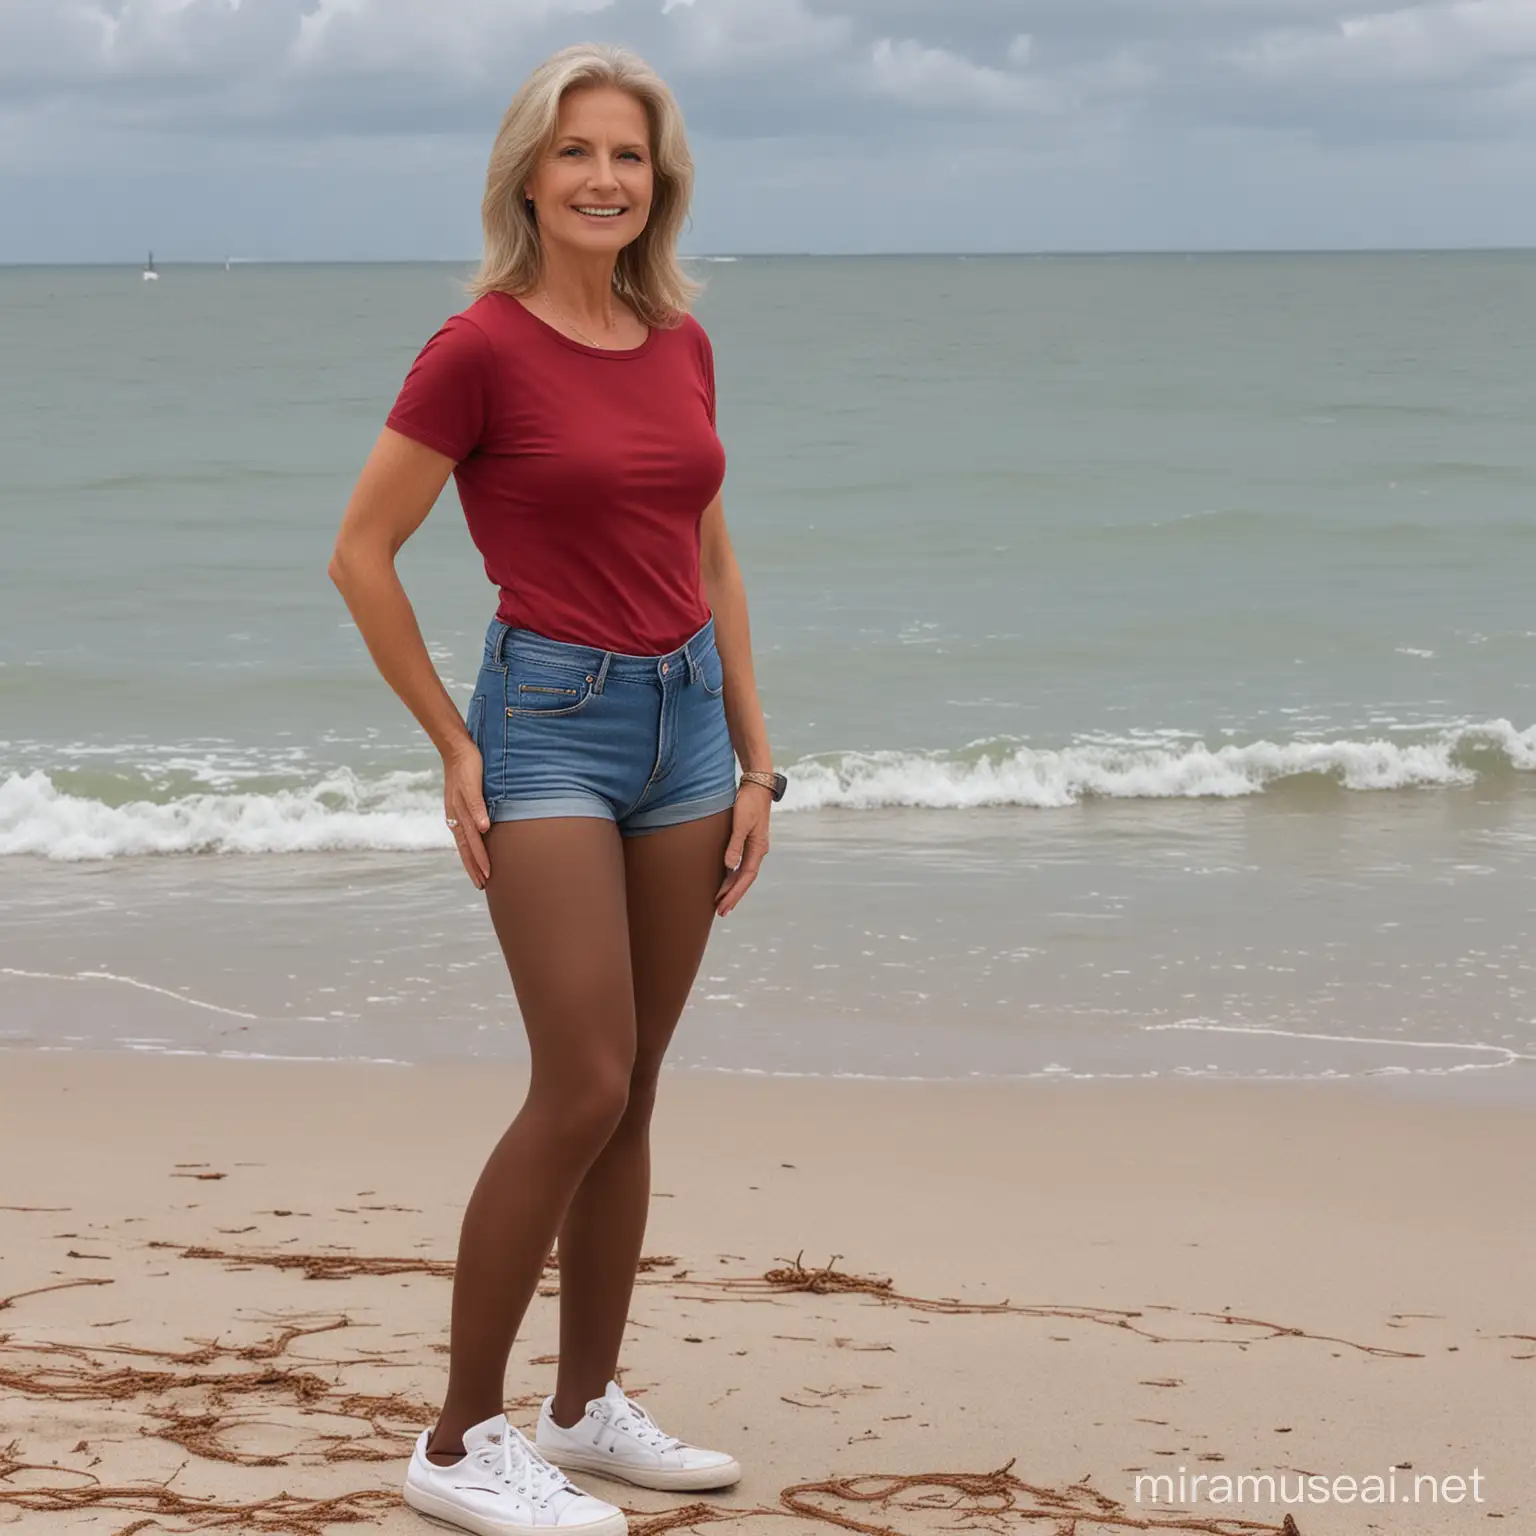 Mature lady 60 years old, straight bonde hair, small breasts, wide hips, shiny dark brown pantyhose nylon tights, denim jean shorts, maroon t-shirt,  white leather sneakers, standing on Florida beach